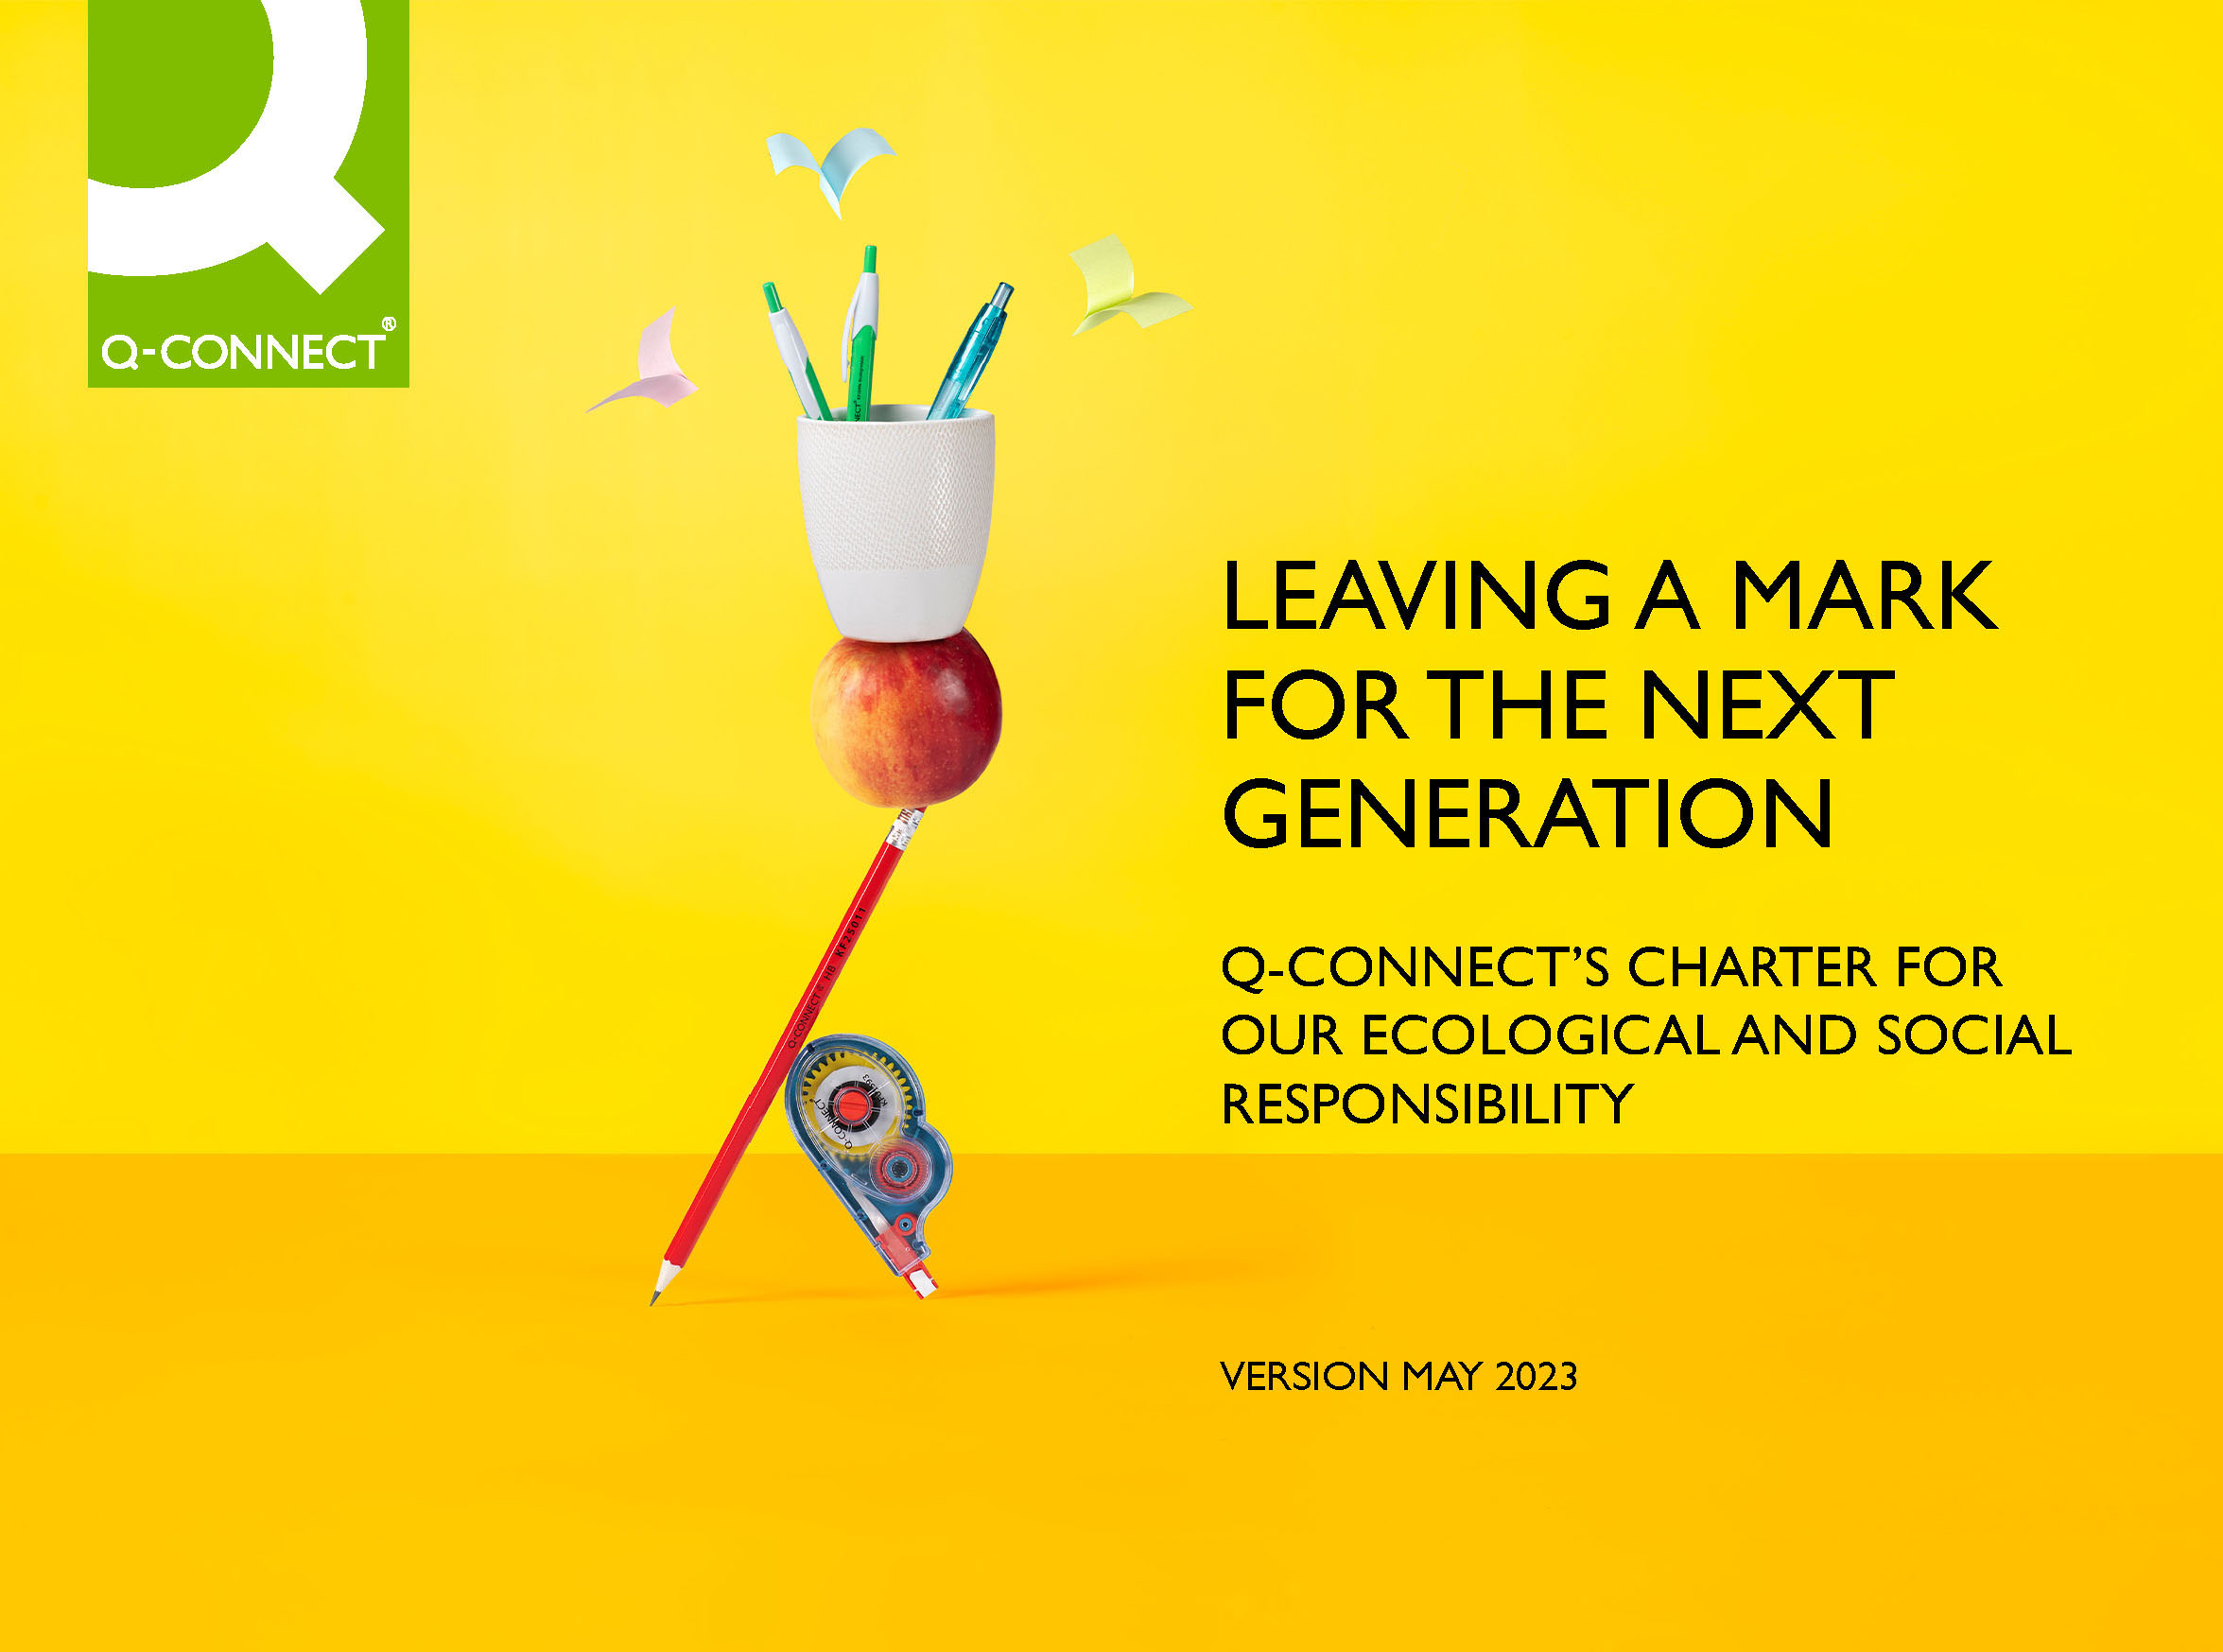 LEAVING A MARK FOR THE NEXT GENERATION. Q-CONNECT'S CHARTER FOR OUR ECOLOGICAL AND SOCIAL RESPONSIBILITY. VERSION MAY 2023.